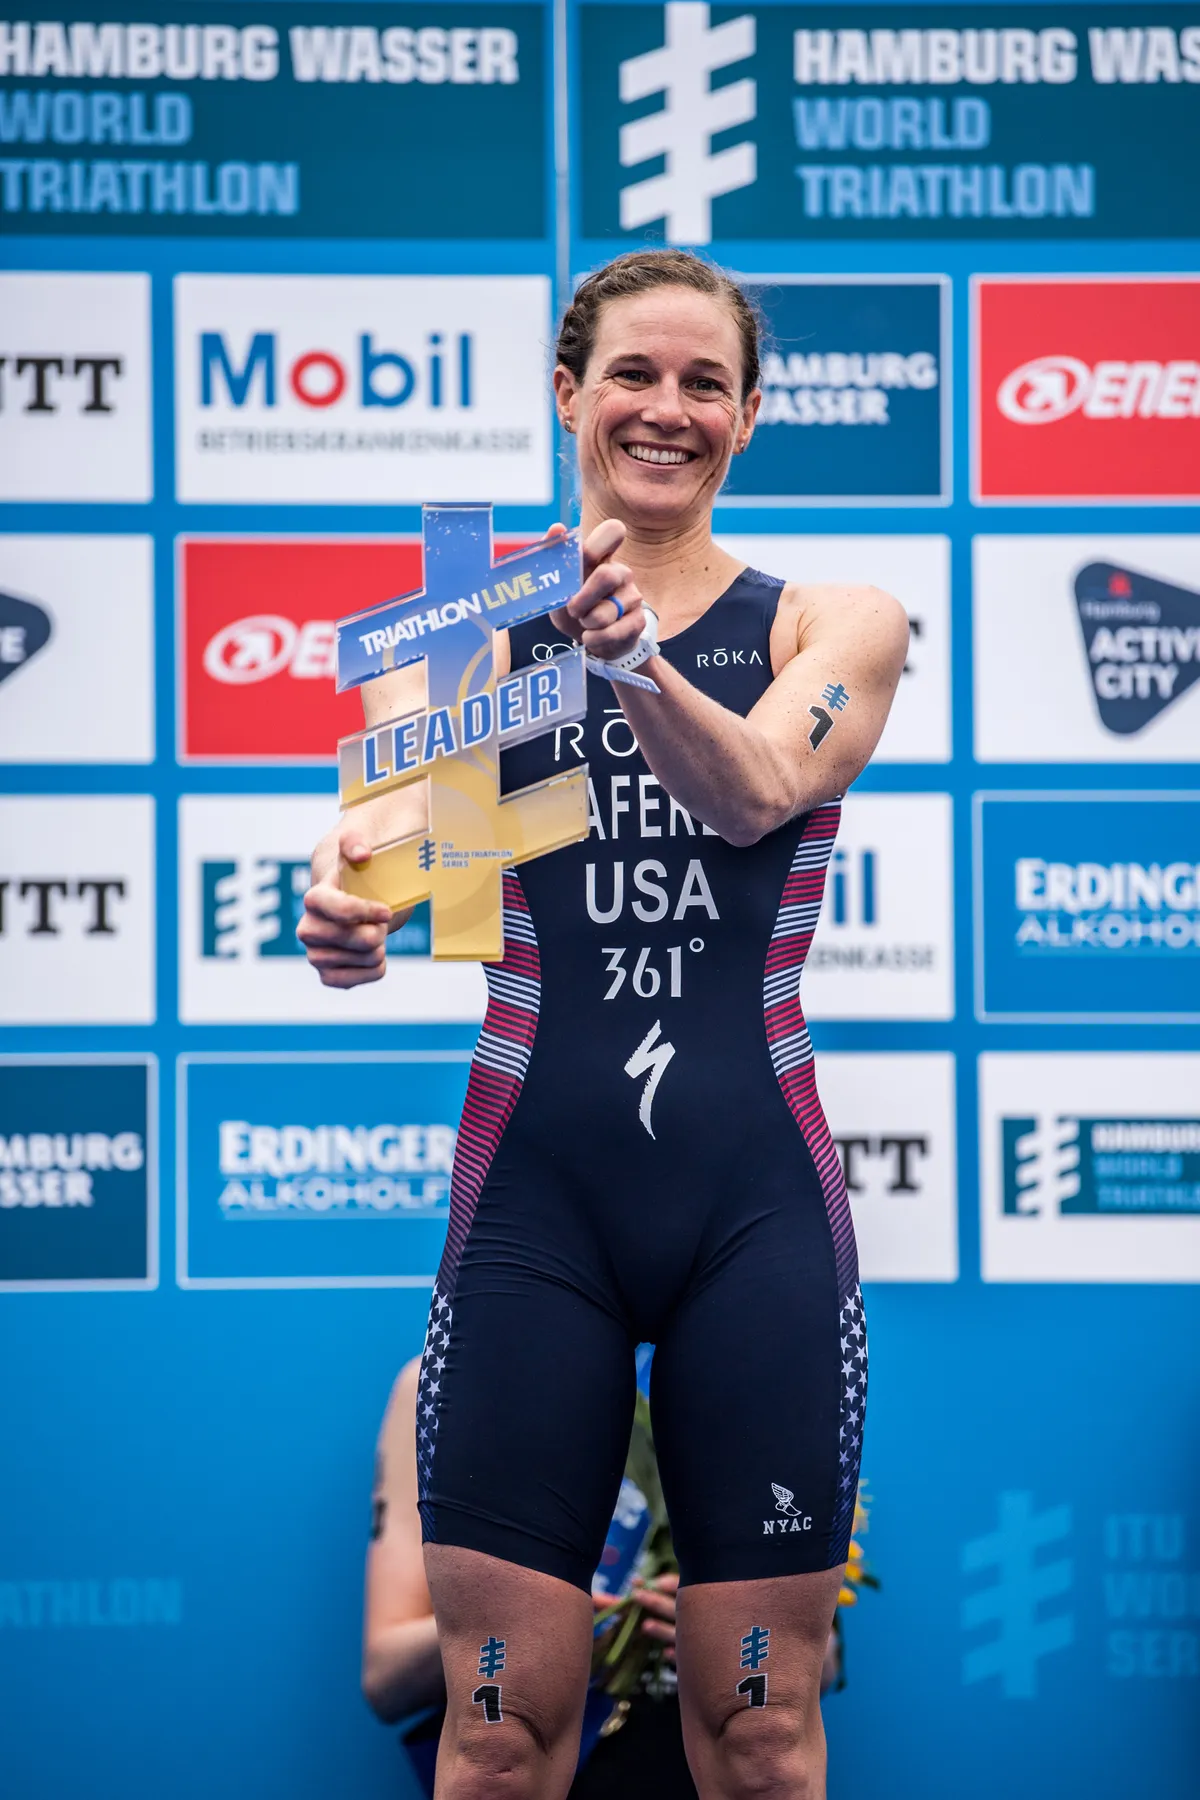 HAMBURG, GERMANY - JULY 06: (EDITORS NOTE: Image has been digitally enhanced.) Katie Zaferes of USA (world leader) poses with the trophy on the podium after the ITU World Triathlon Elite women sprint distance during the Hamburg Wasser World Triathlon on July 06, 2019 in Hamburg, Germany. (Photo by Lukas Schulze/Getty Images for IRONMAN)